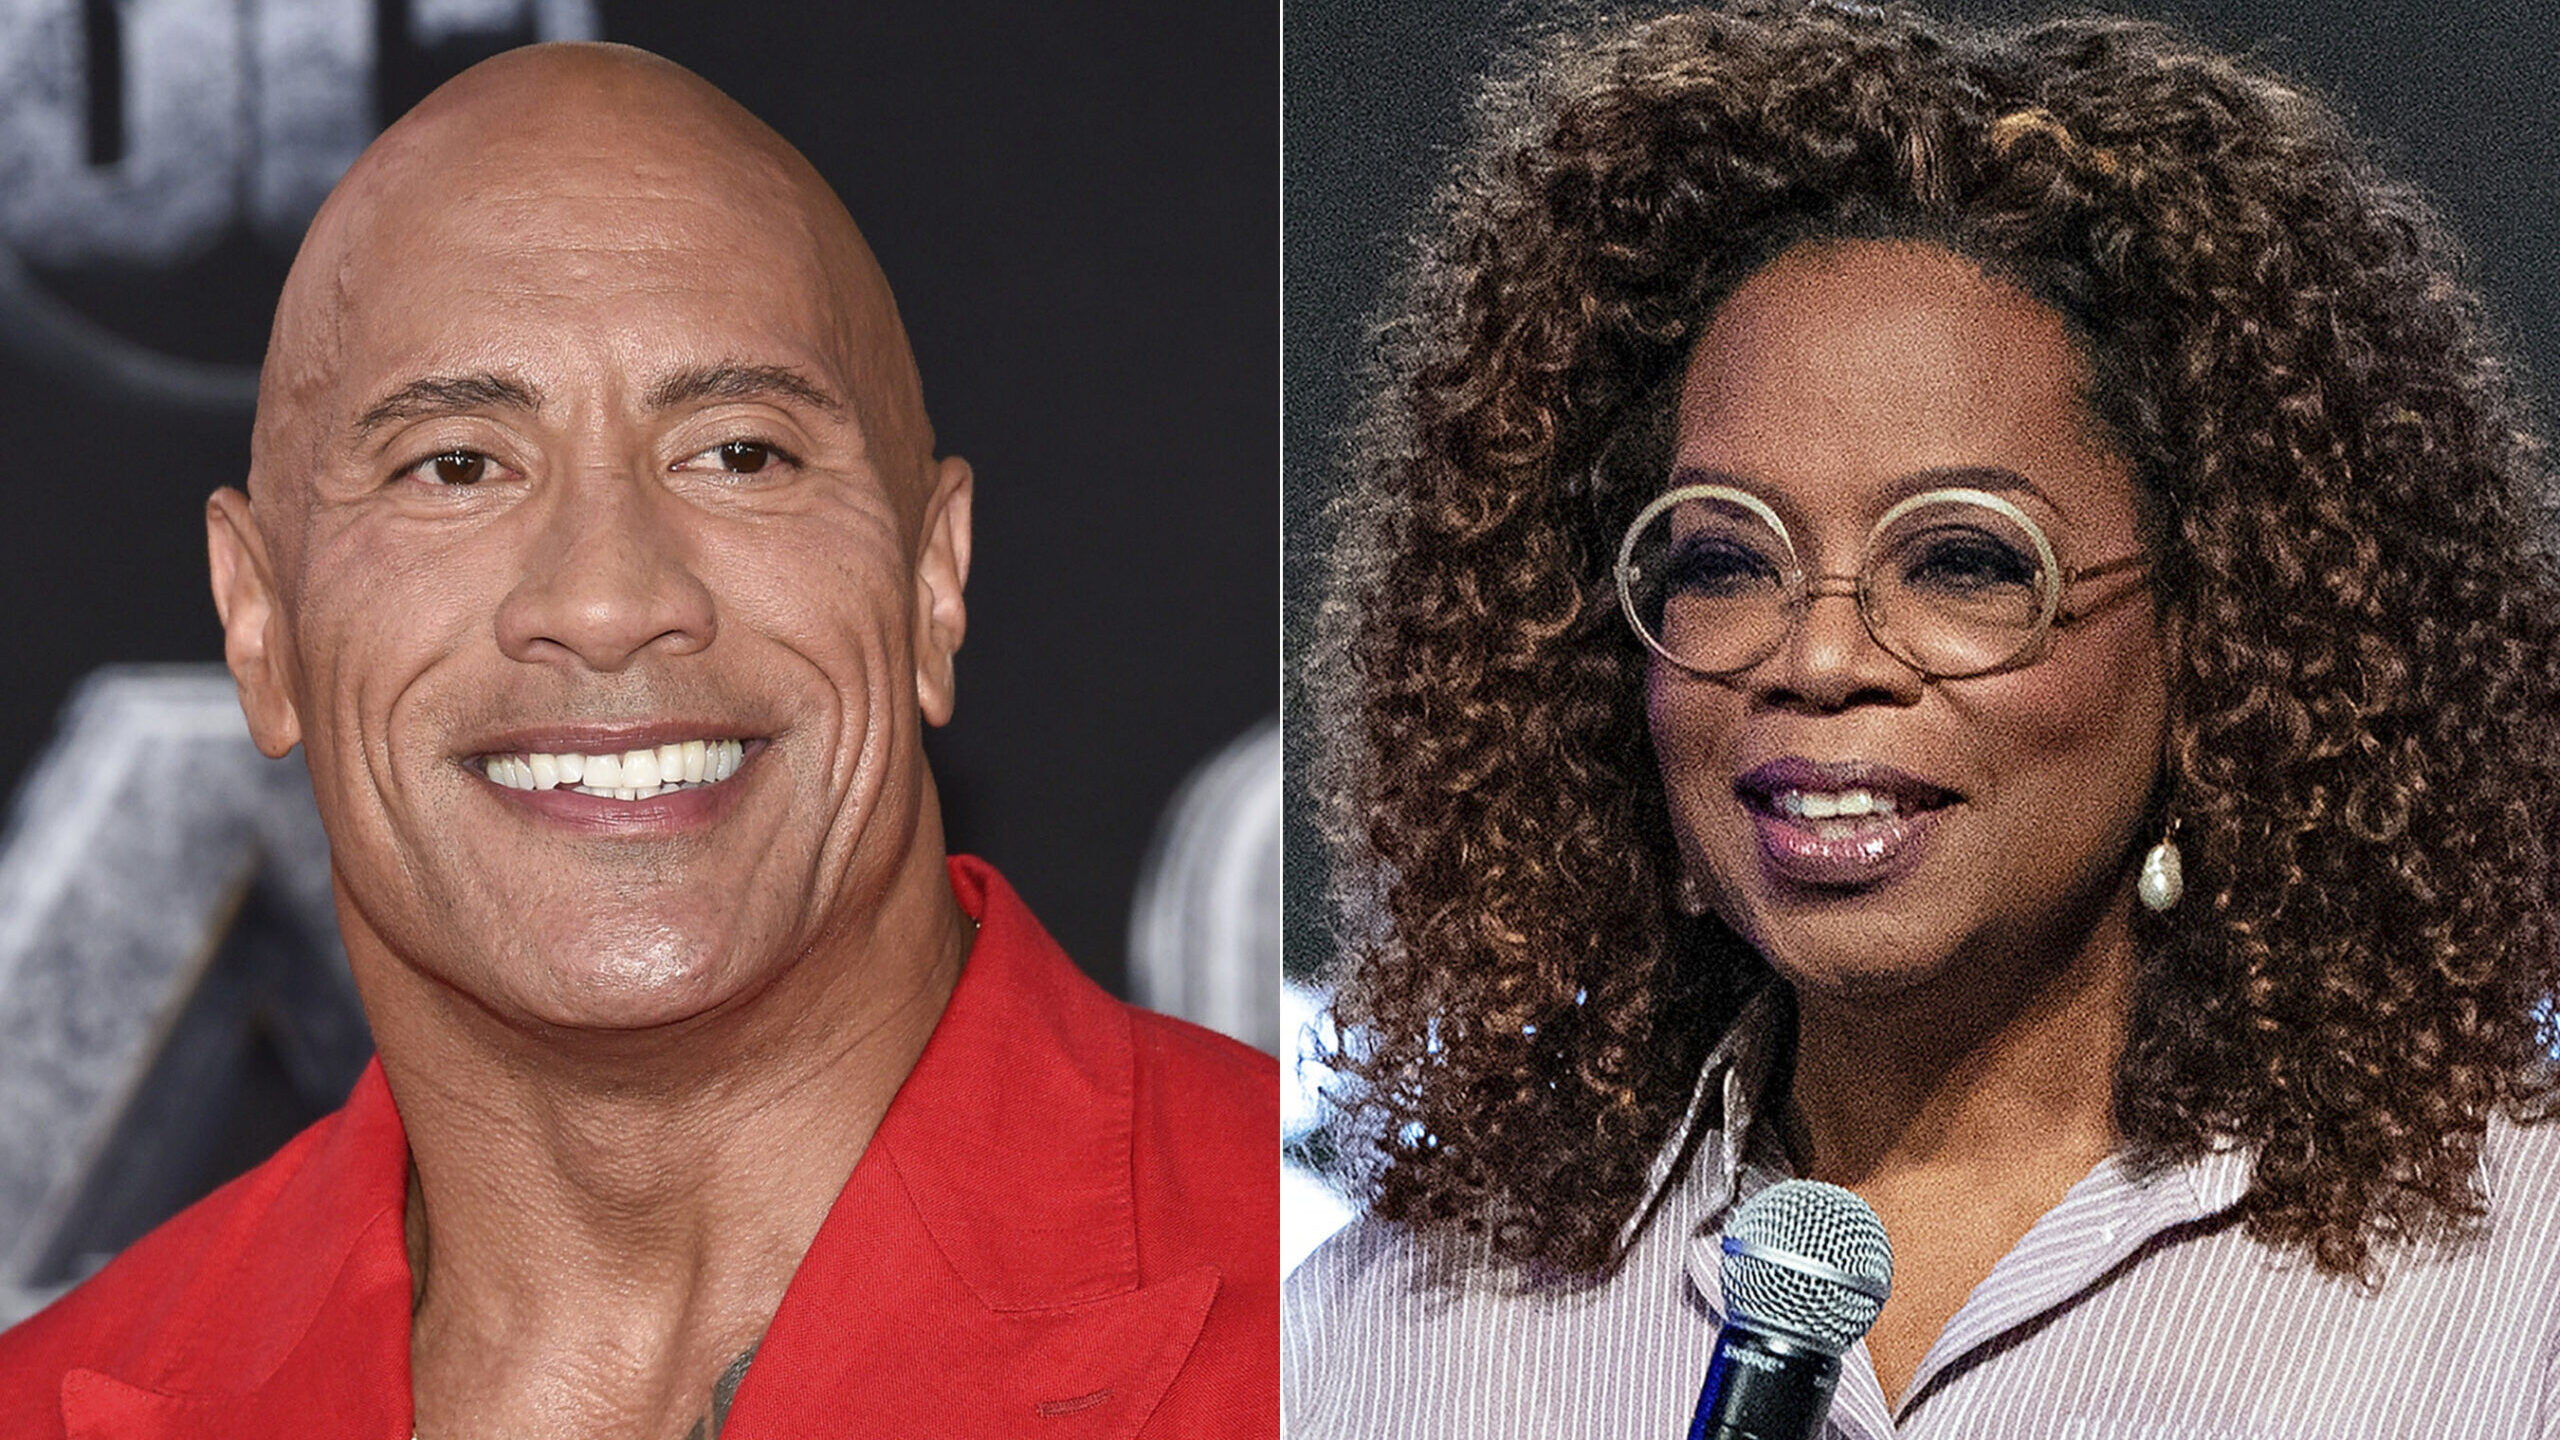 Oprah Winfrey and Dwayne Johnson have committed $10 million to make direct payments to people on Ma...